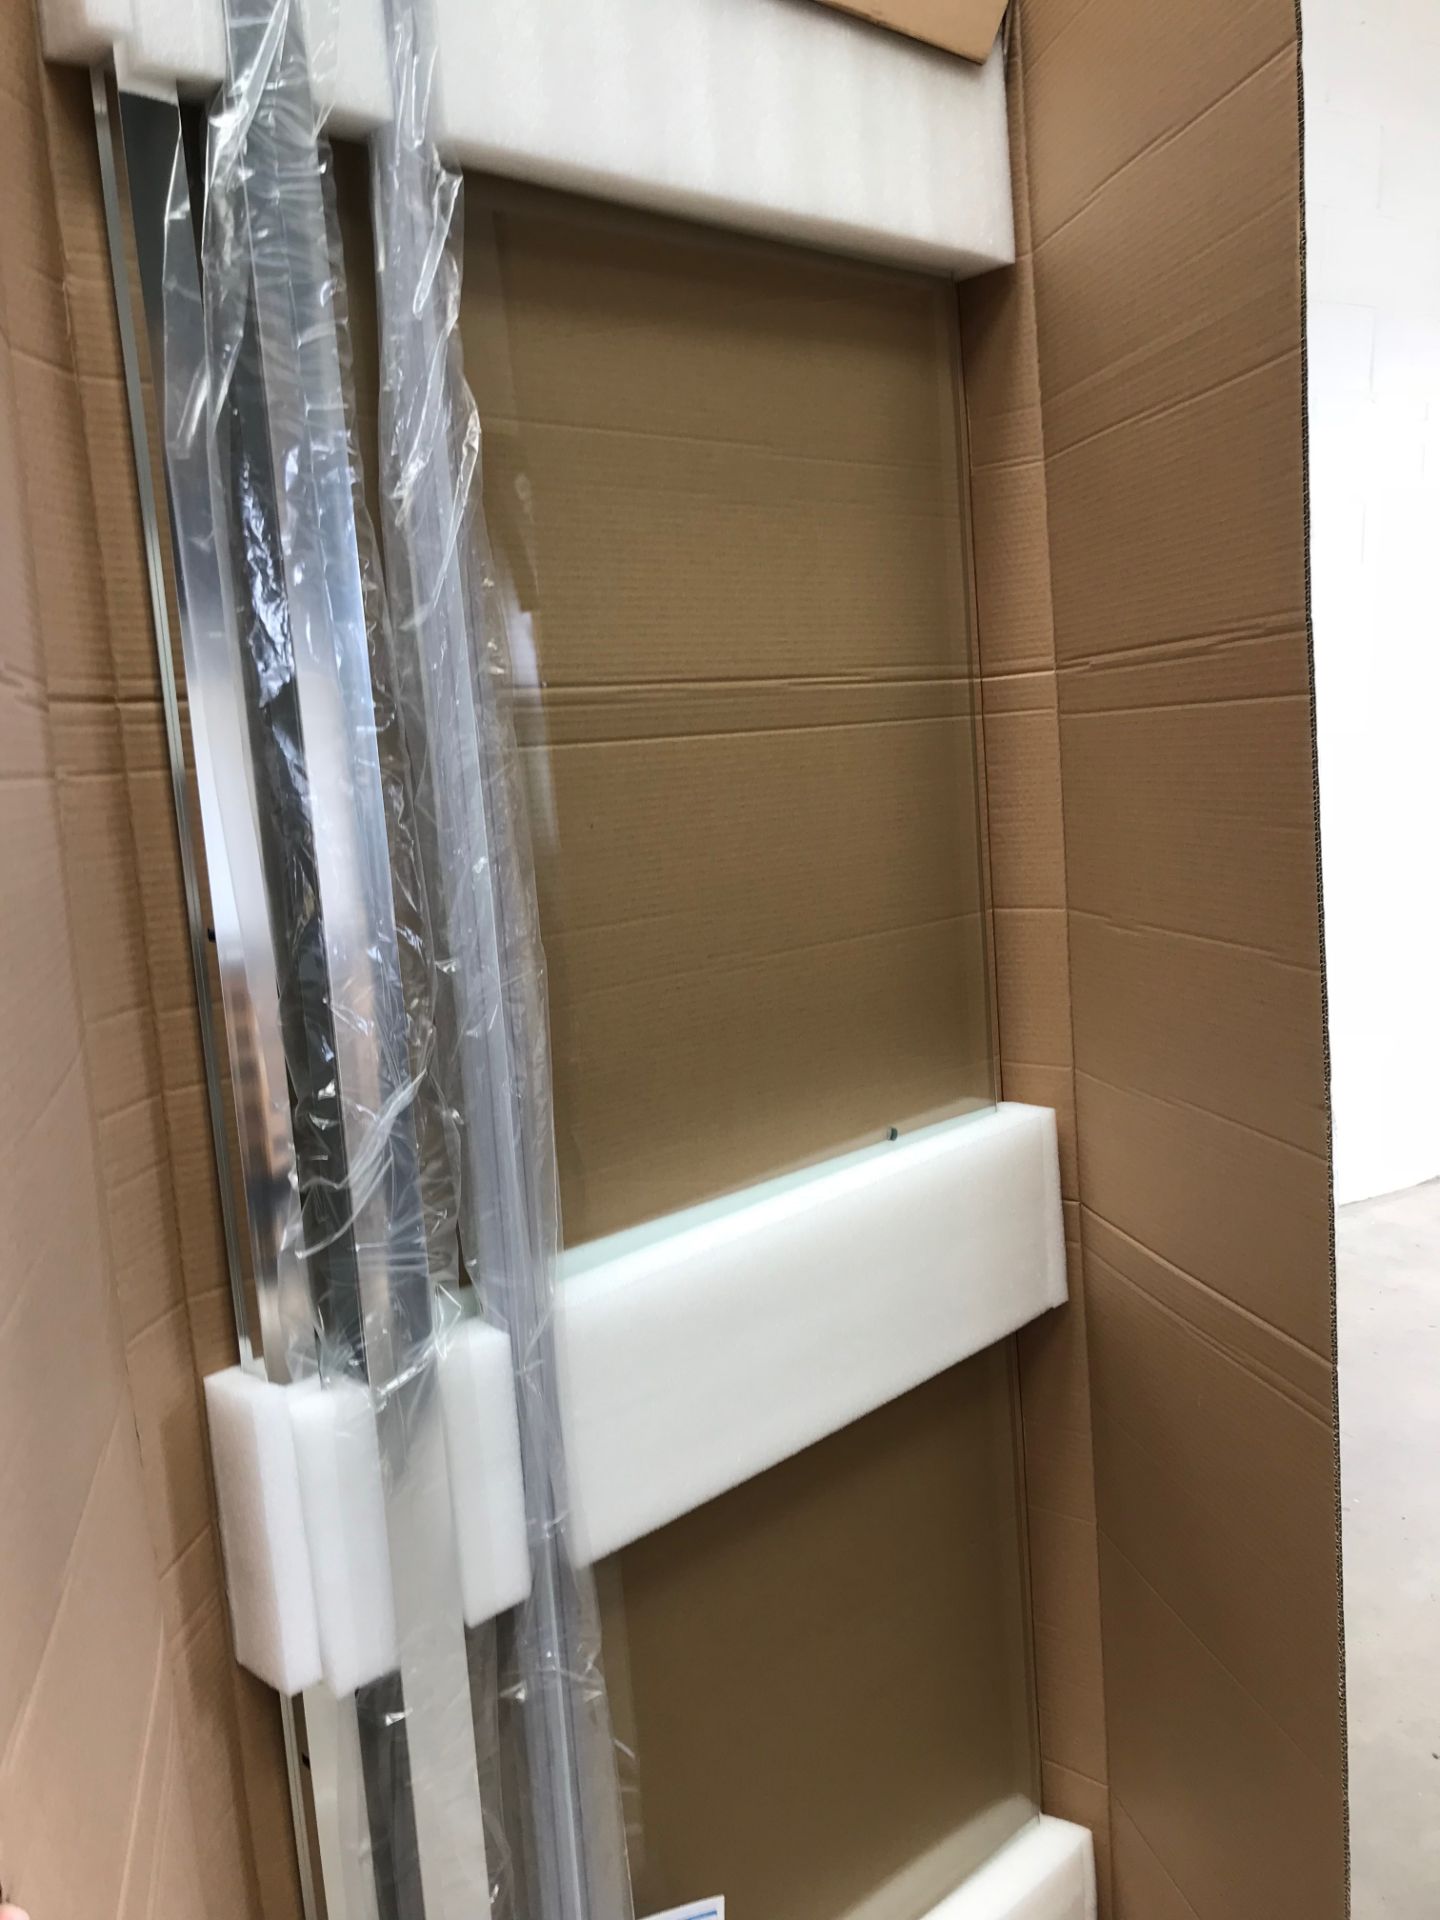 10 x Hinged Shower Enclosures 900mm x 900mm - Image 6 of 6